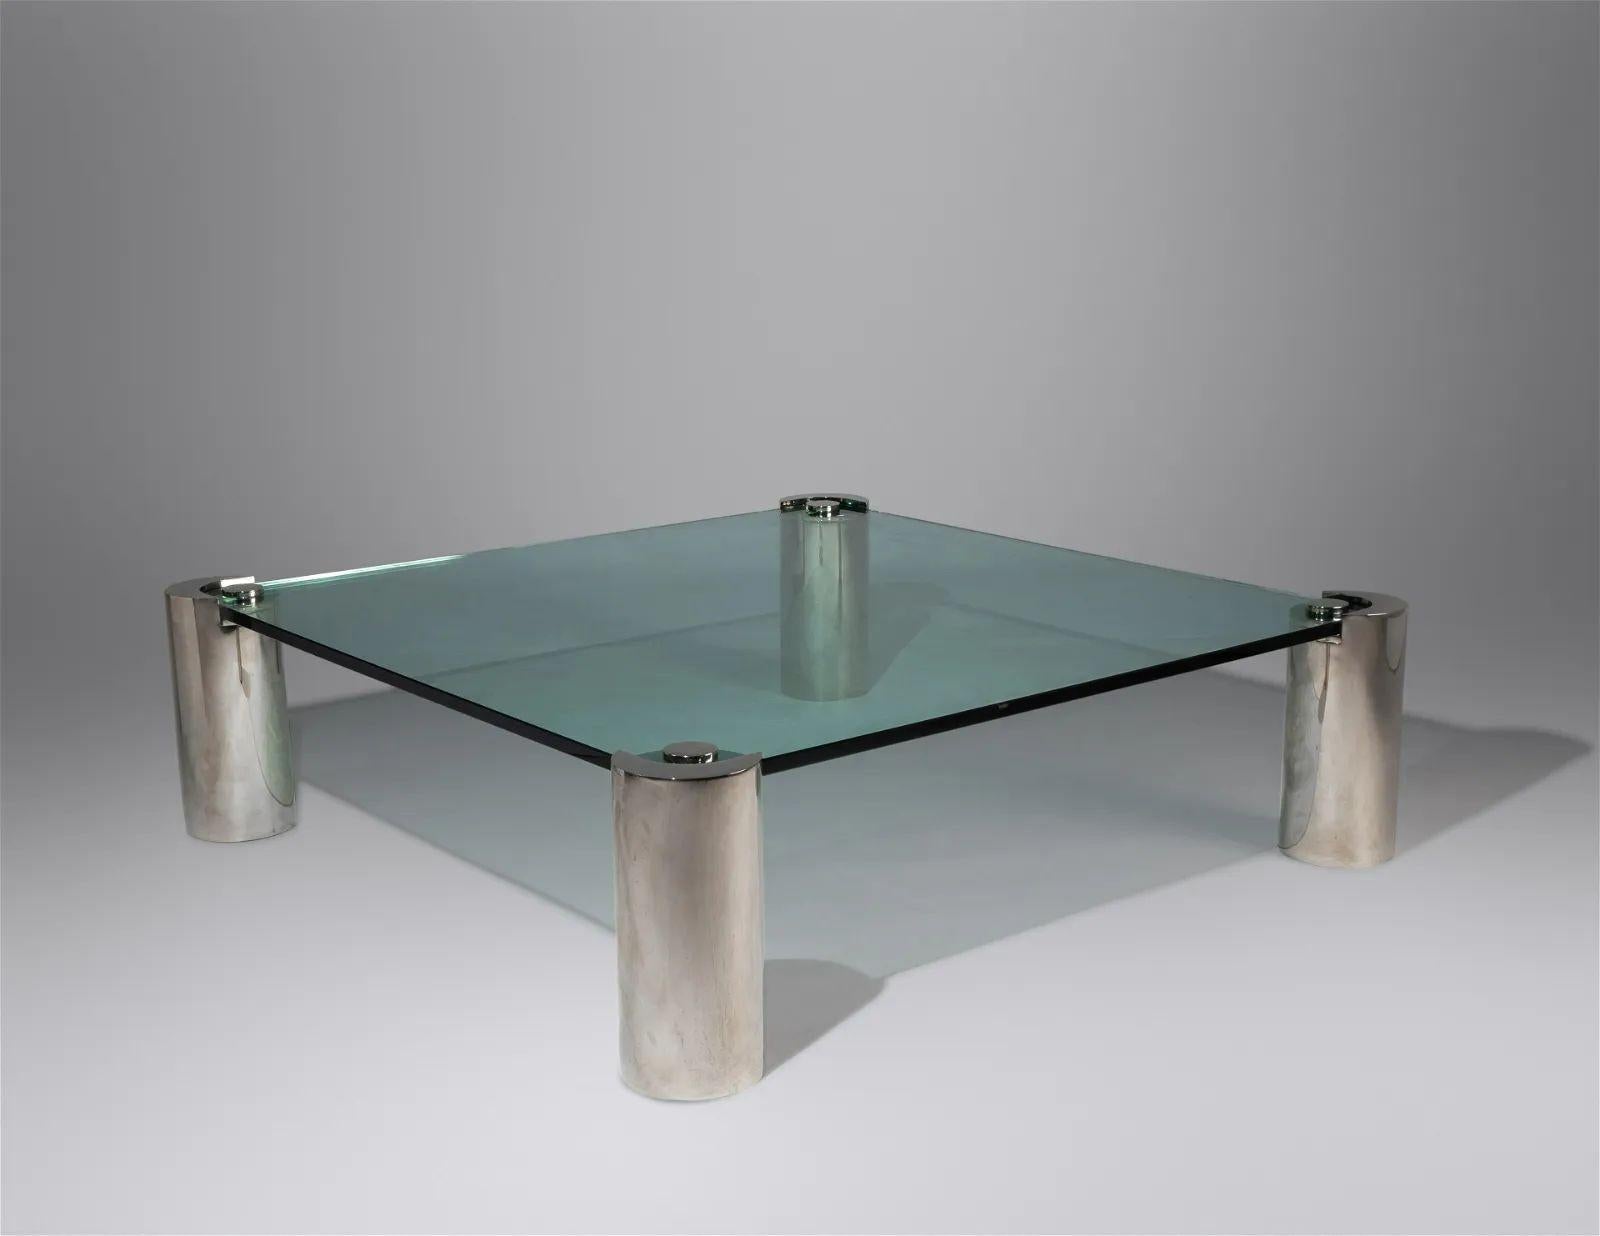 Mid-Century Modern Karl Springer Signed Chrome Coffee, Cocktail Table, Glass Top
 
Karl Springer Chrome Coffee, Cocktail Table, Glass Top. Base having the impressed signature. 
 
A large and impressive coffee cocktail table by Karl Springer having